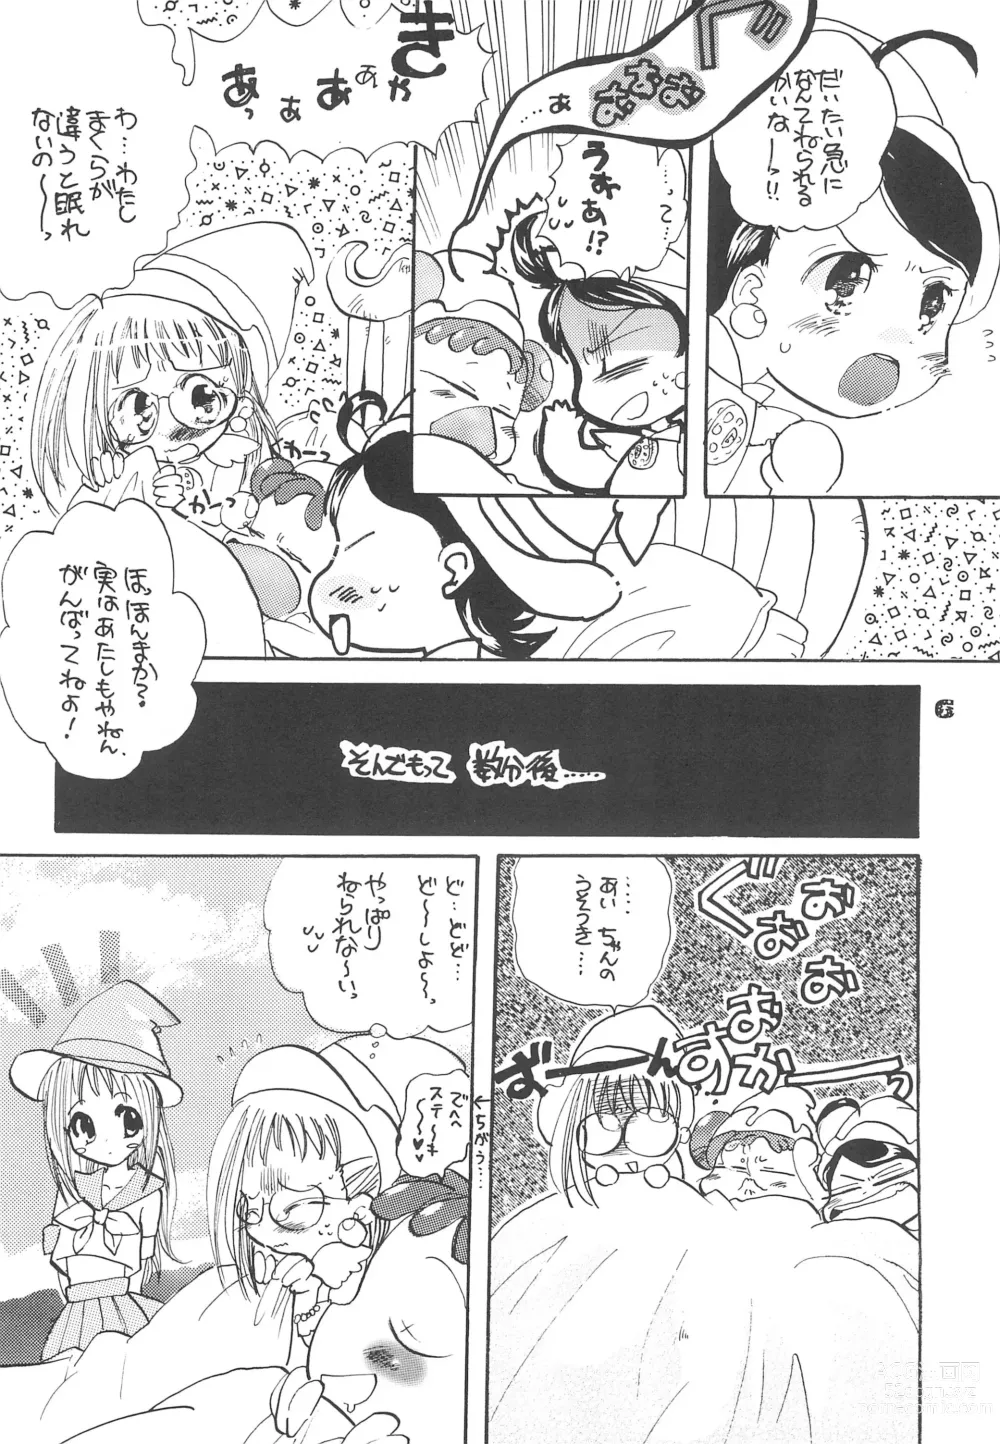 Page 8 of doujinshi Twinkle Melody